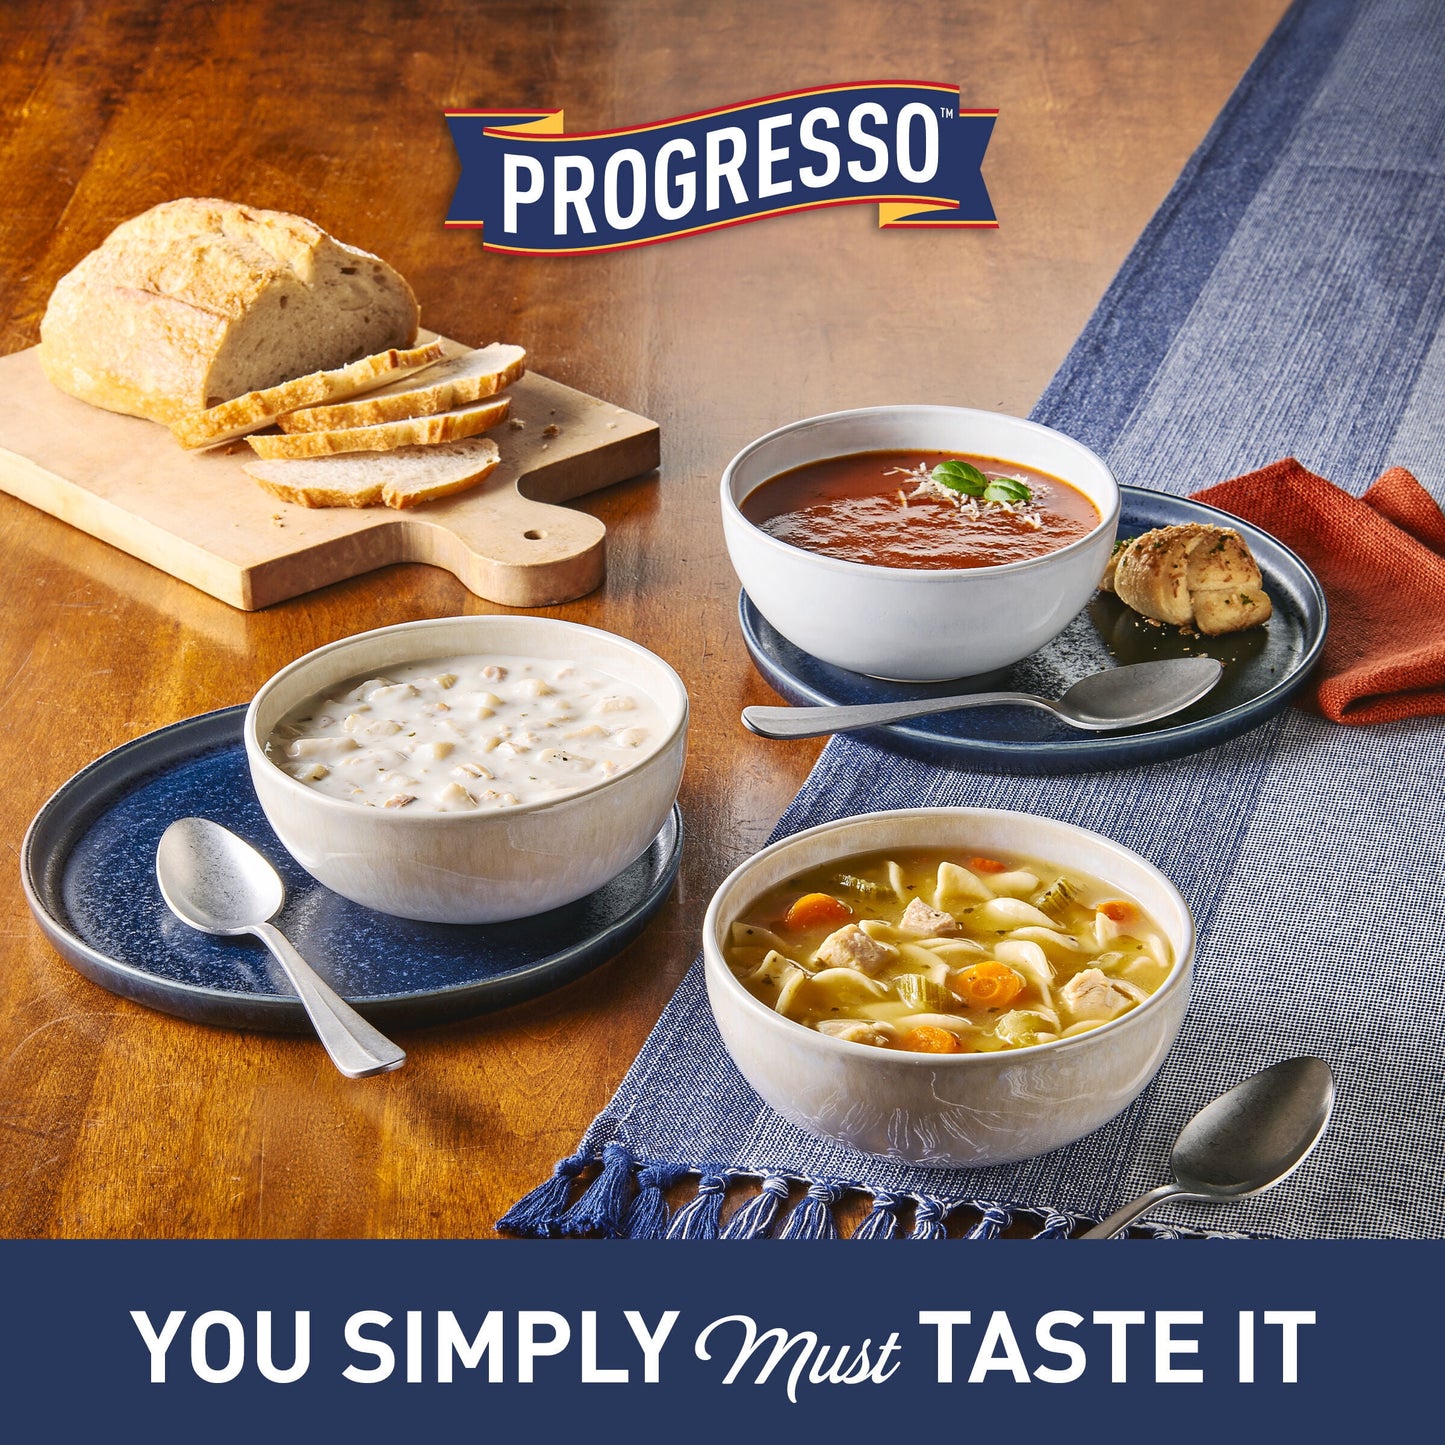 Progresso Traditional, Creamy Chicken Noodle Canned Soup, 18.5 oz.